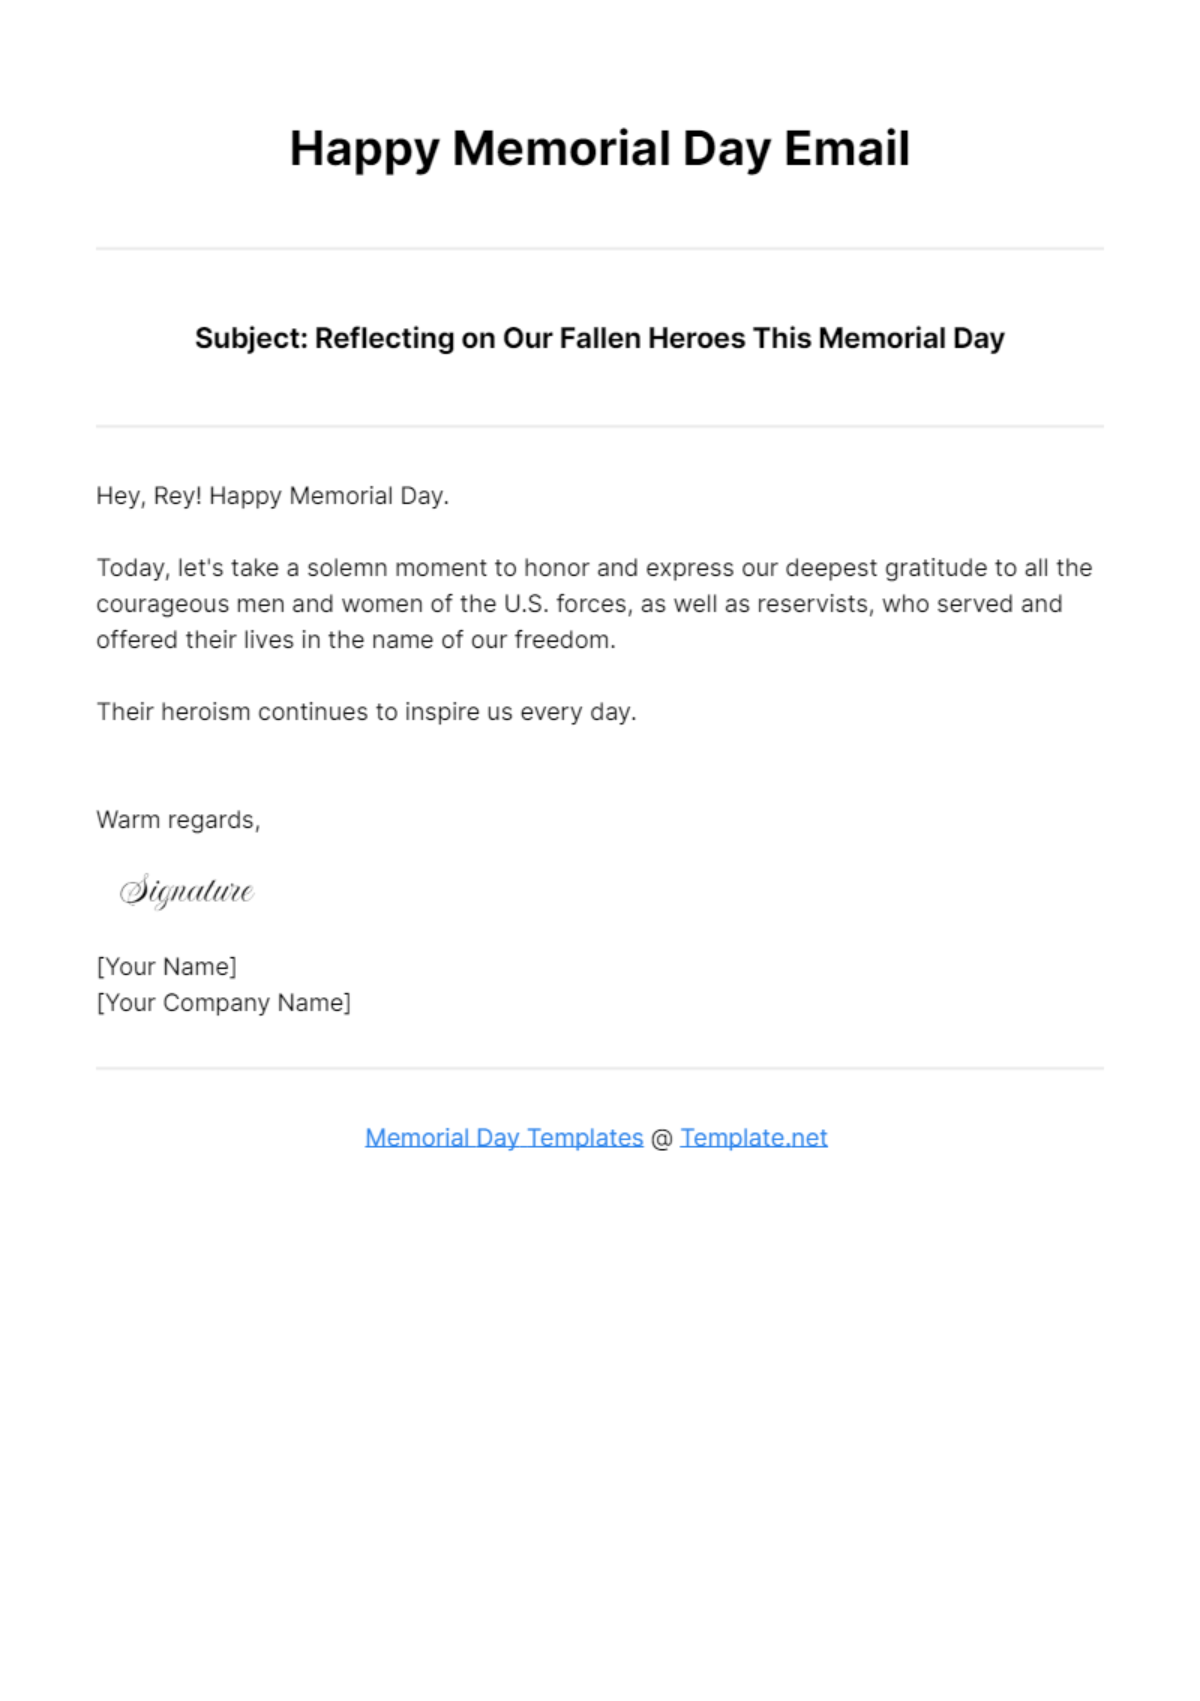 Happy Memorial Day Email Template